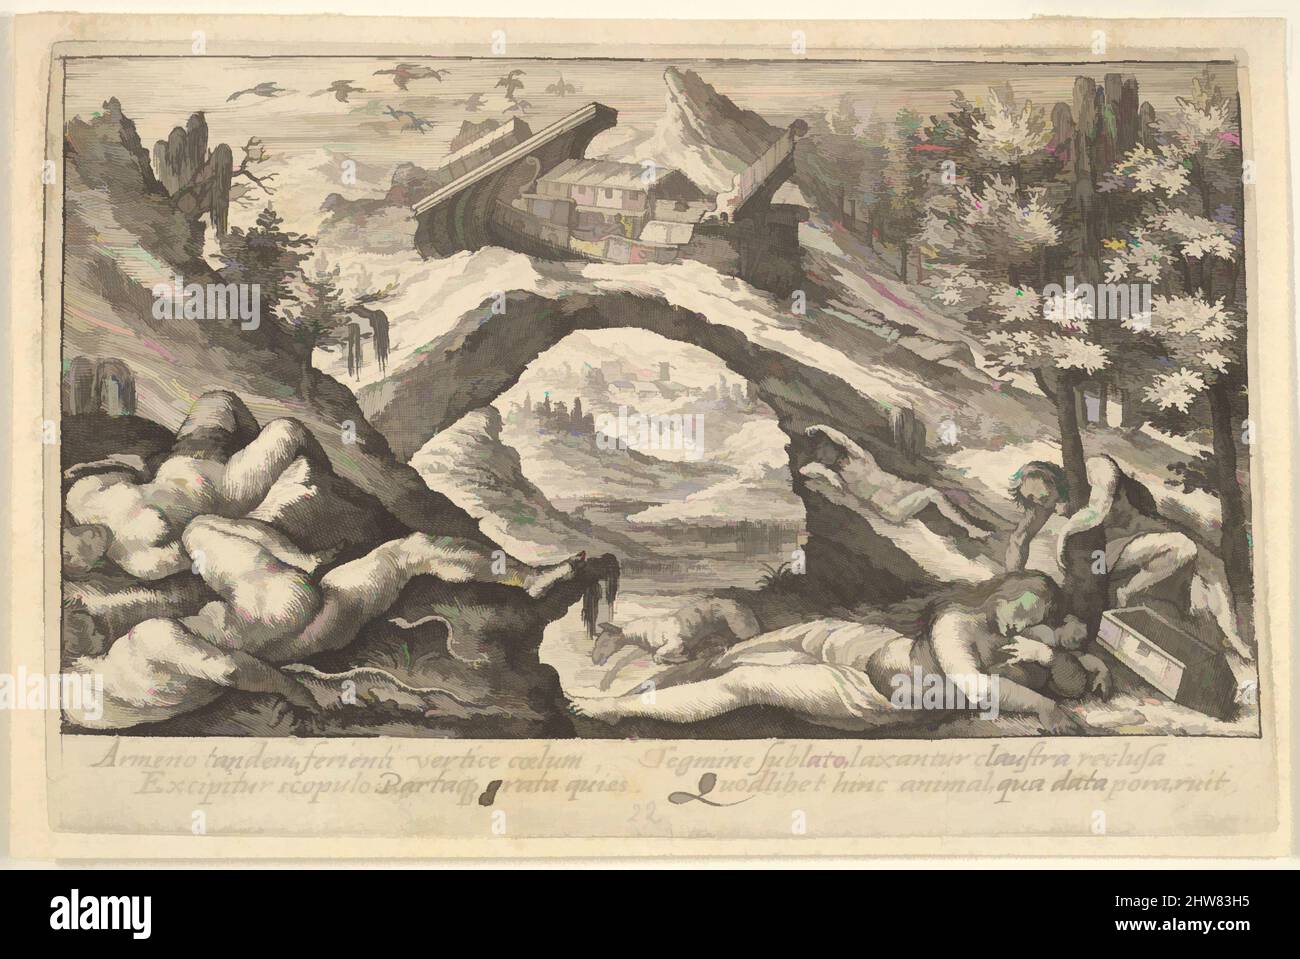 Art inspired by Aftermath of the Flood: human bodies strewn on dry land in the foreground, Noah's ark moored on a rocky outcrop beyond, from a series of engravings for the 'Liber Genesis', 1612, Engraving, Sheet: 3 1/2 x 5 5/16 in. (8.9 x 13.5 cm), Prints, Crispijn de Passe the Elder (, Classic works modernized by Artotop with a splash of modernity. Shapes, color and value, eye-catching visual impact on art. Emotions through freedom of artworks in a contemporary way. A timeless message pursuing a wildly creative new direction. Artists turning to the digital medium and creating the Artotop NFT Stock Photo